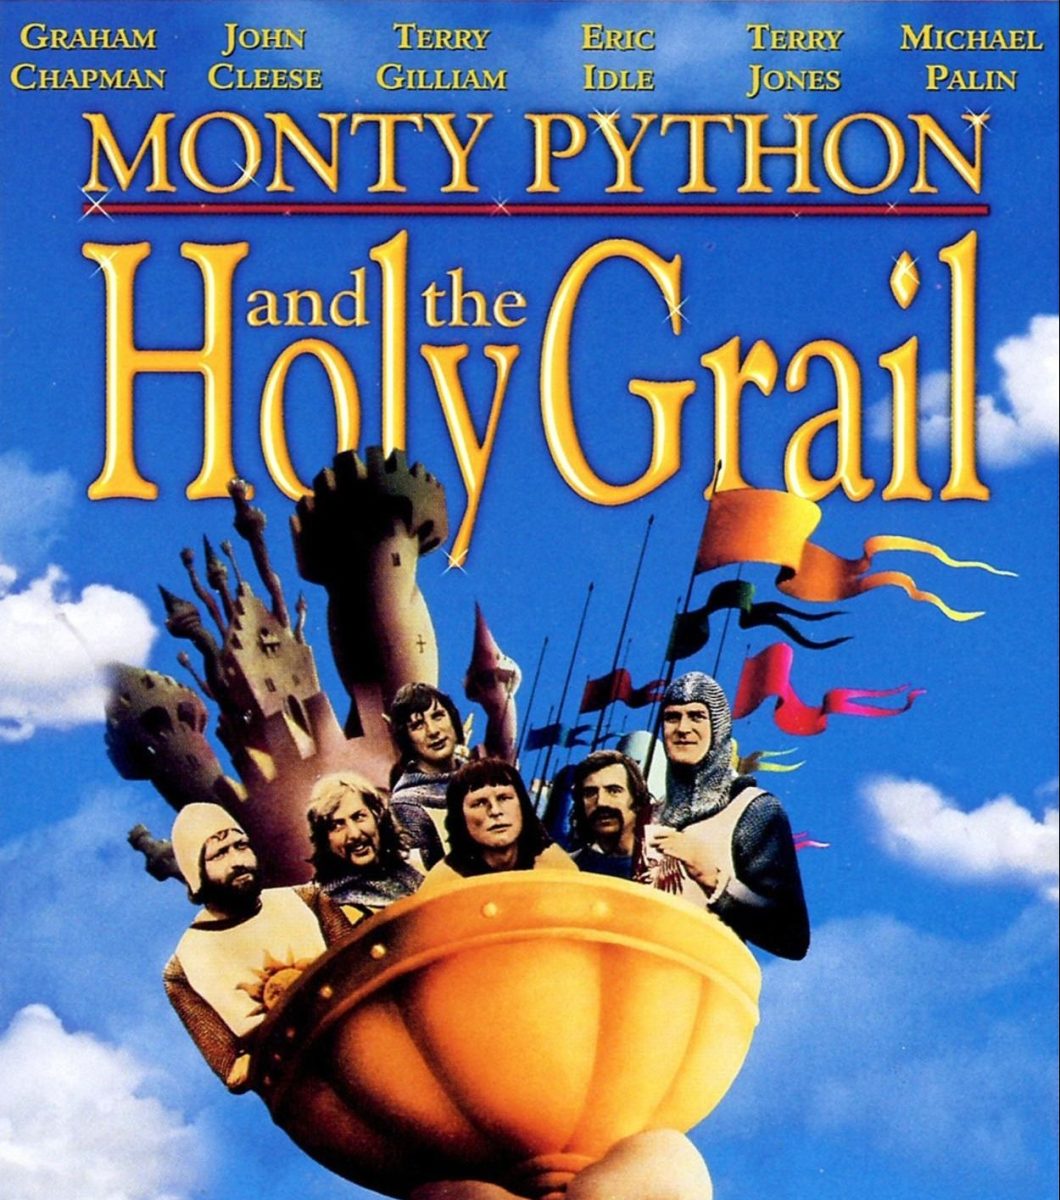 MONTY PYTHON AND THE HOLY GRAIL: STILL HILARIOUS AFTER 50 YEARS